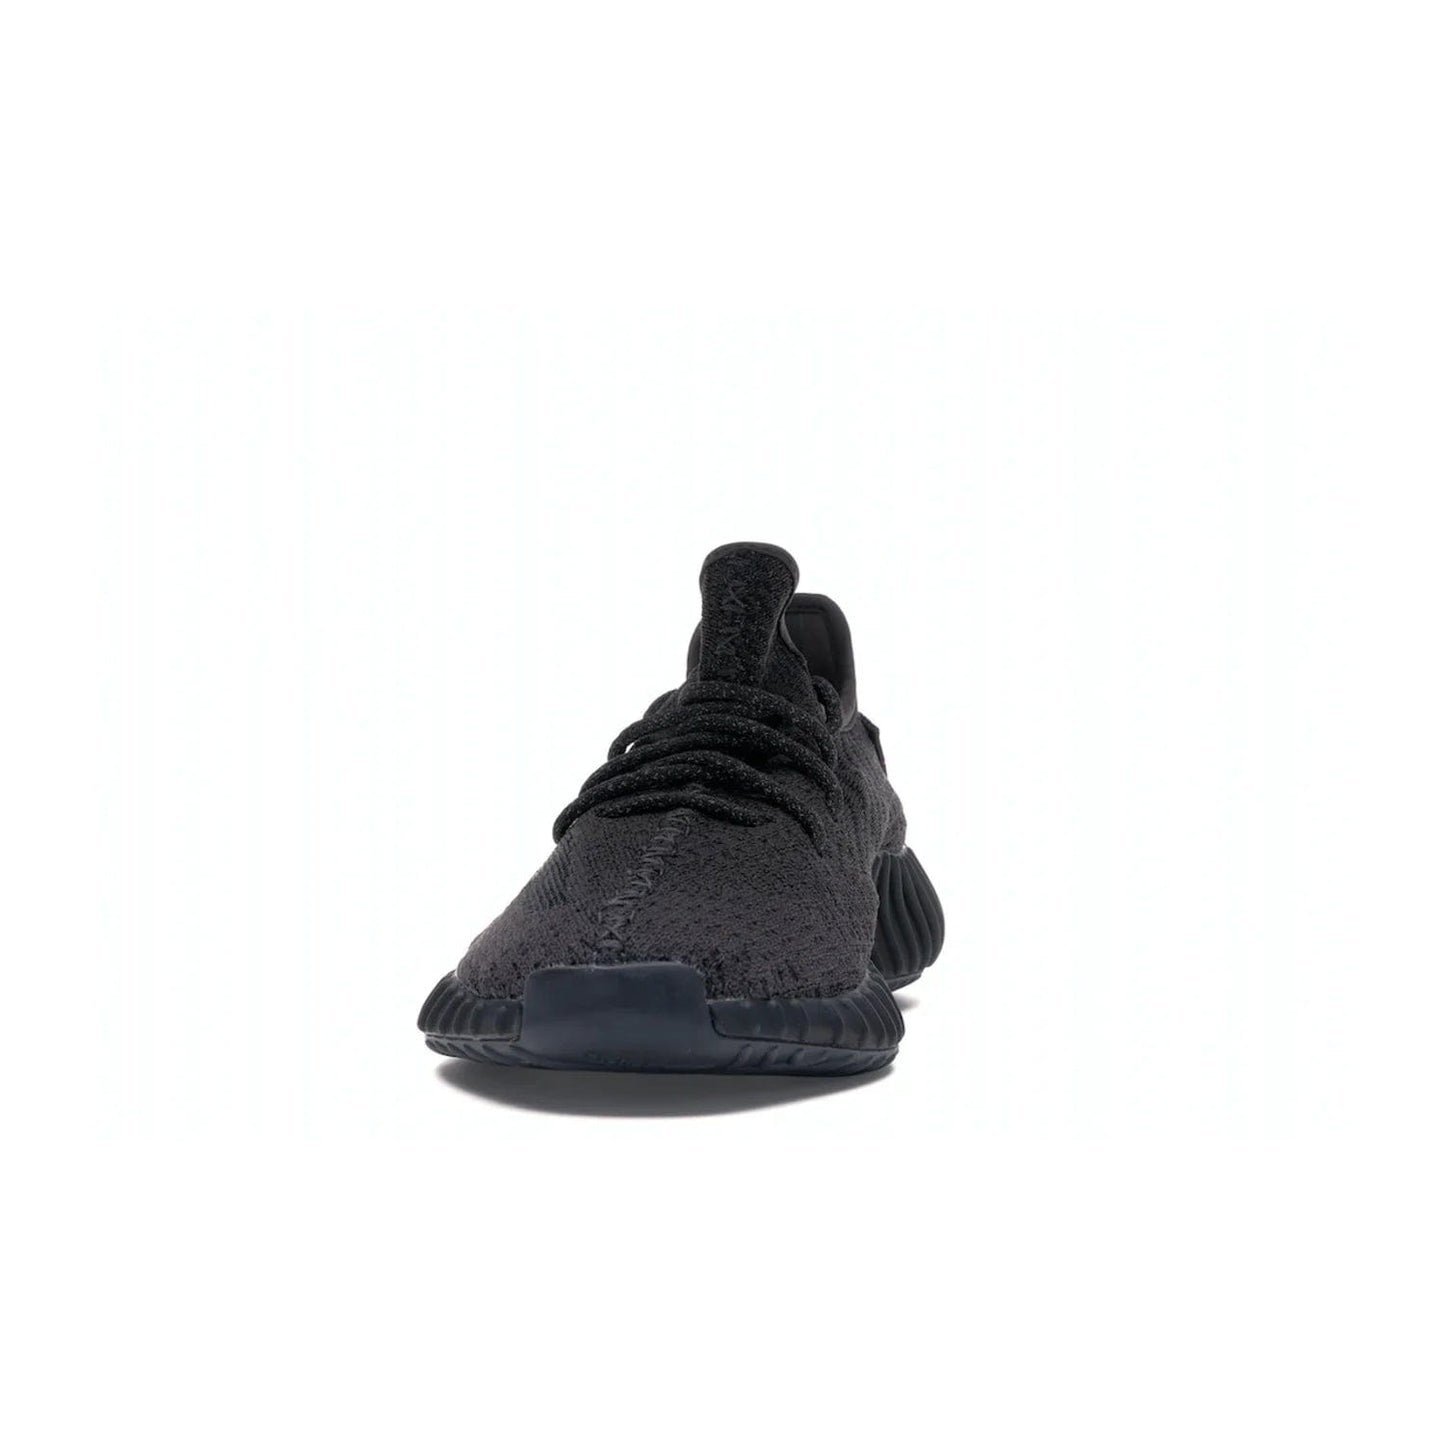 adidas Yeezy Boost 350 V2 Static Black (Reflective) - Image 11 - Only at www.BallersClubKickz.com - Make a statement with the adidas Yeezy Boost 350 V2 Static Black Reflective. All-black upper, reflective accents, midsole, and sole combine for a stylish look. High quality materials. June 2019 release. Add to your collection today.